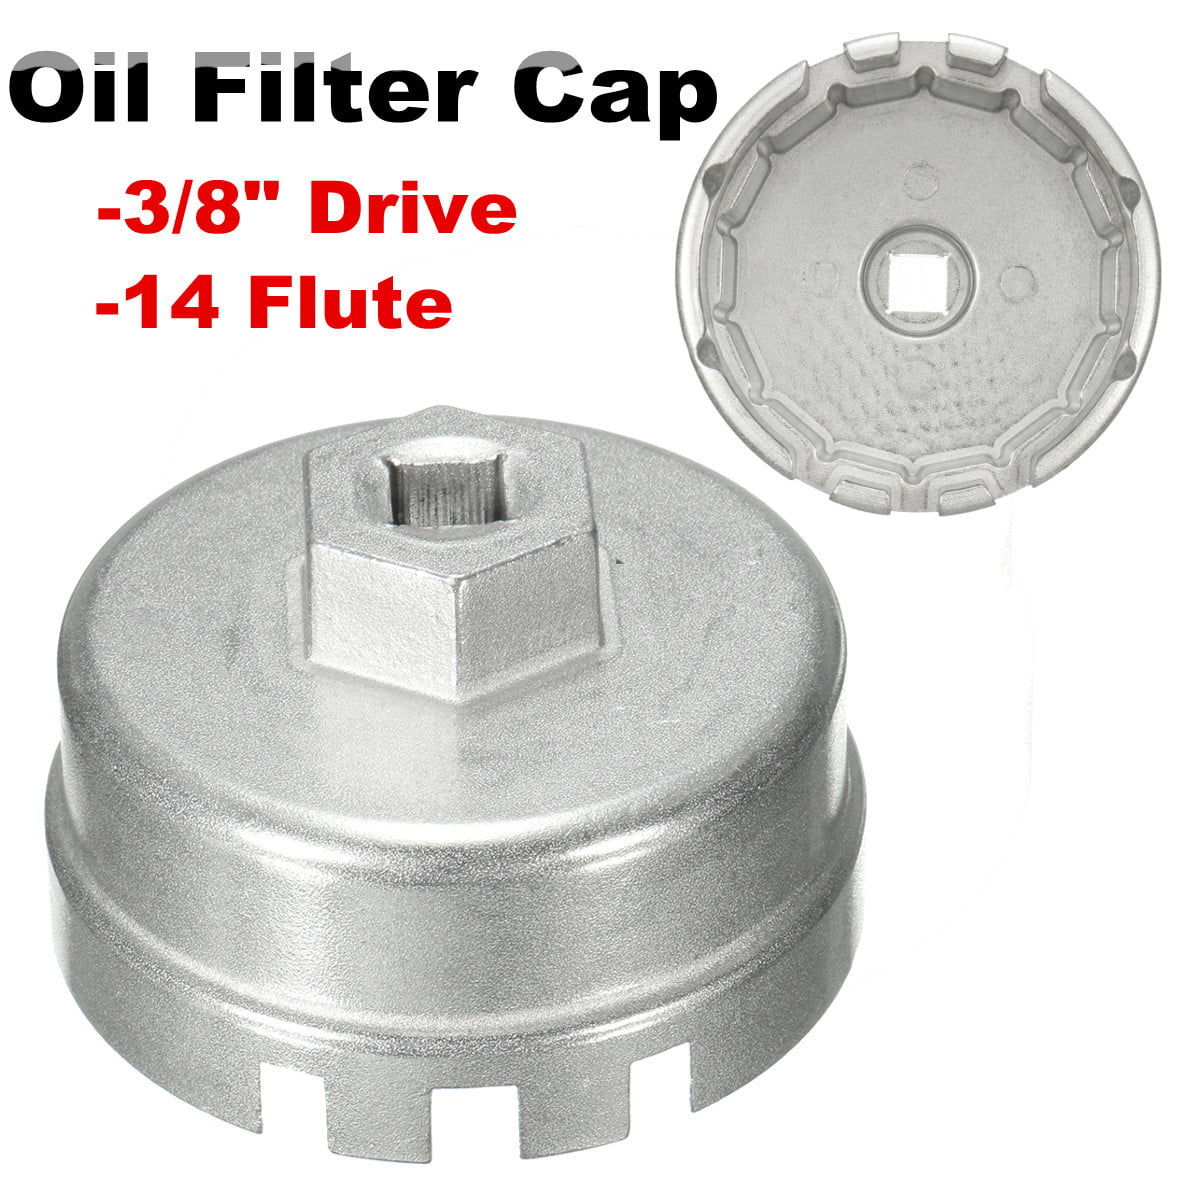 Cap Oil Filter Wrench Socket Tool 14PT fits for Toyota Prius Corrola Rav4 MZO 